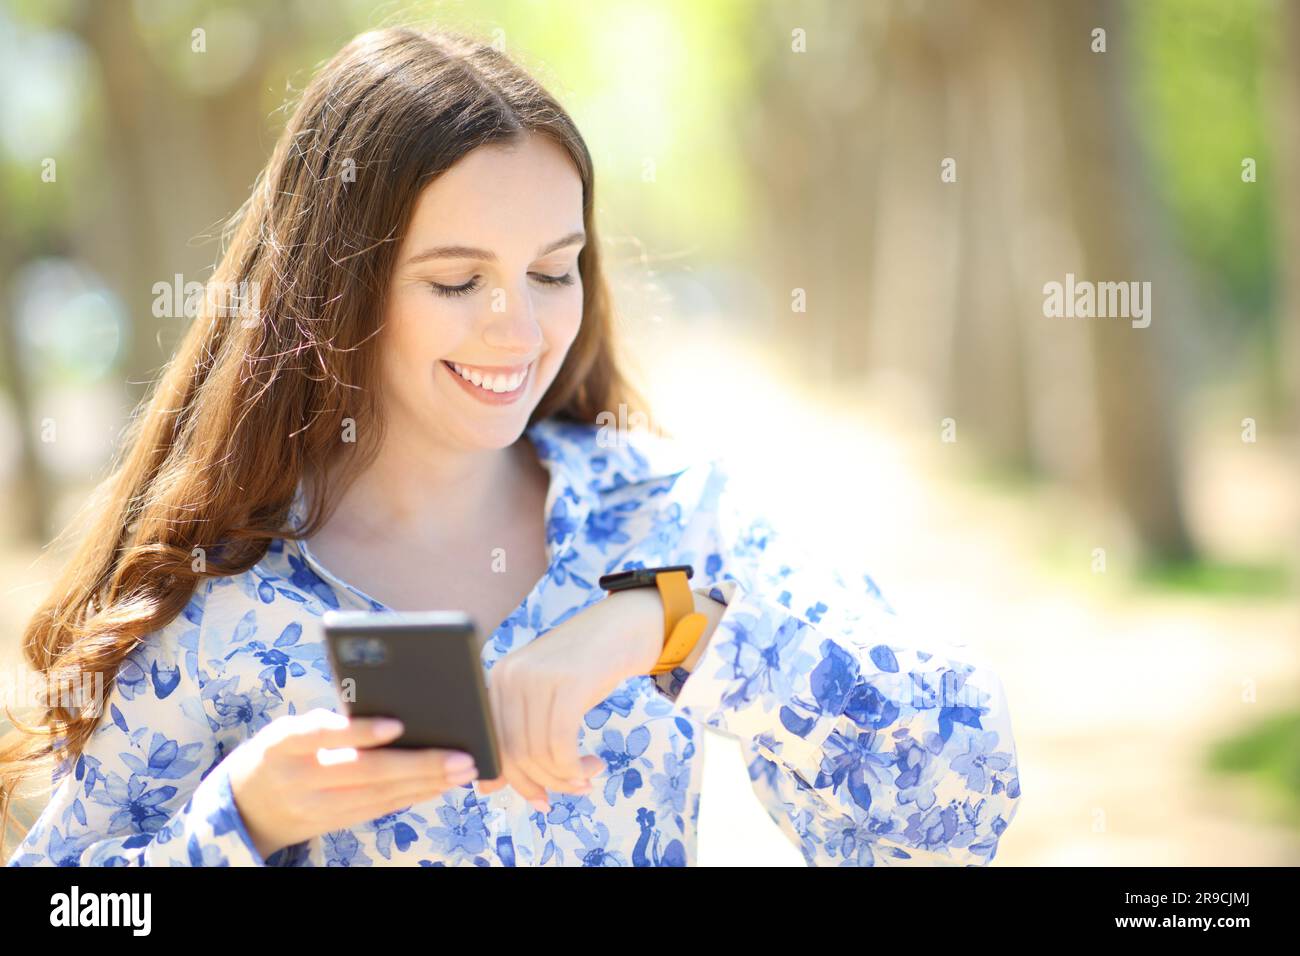 Happy woman holding phone checking smartwatch in a sunny park Stock Photo